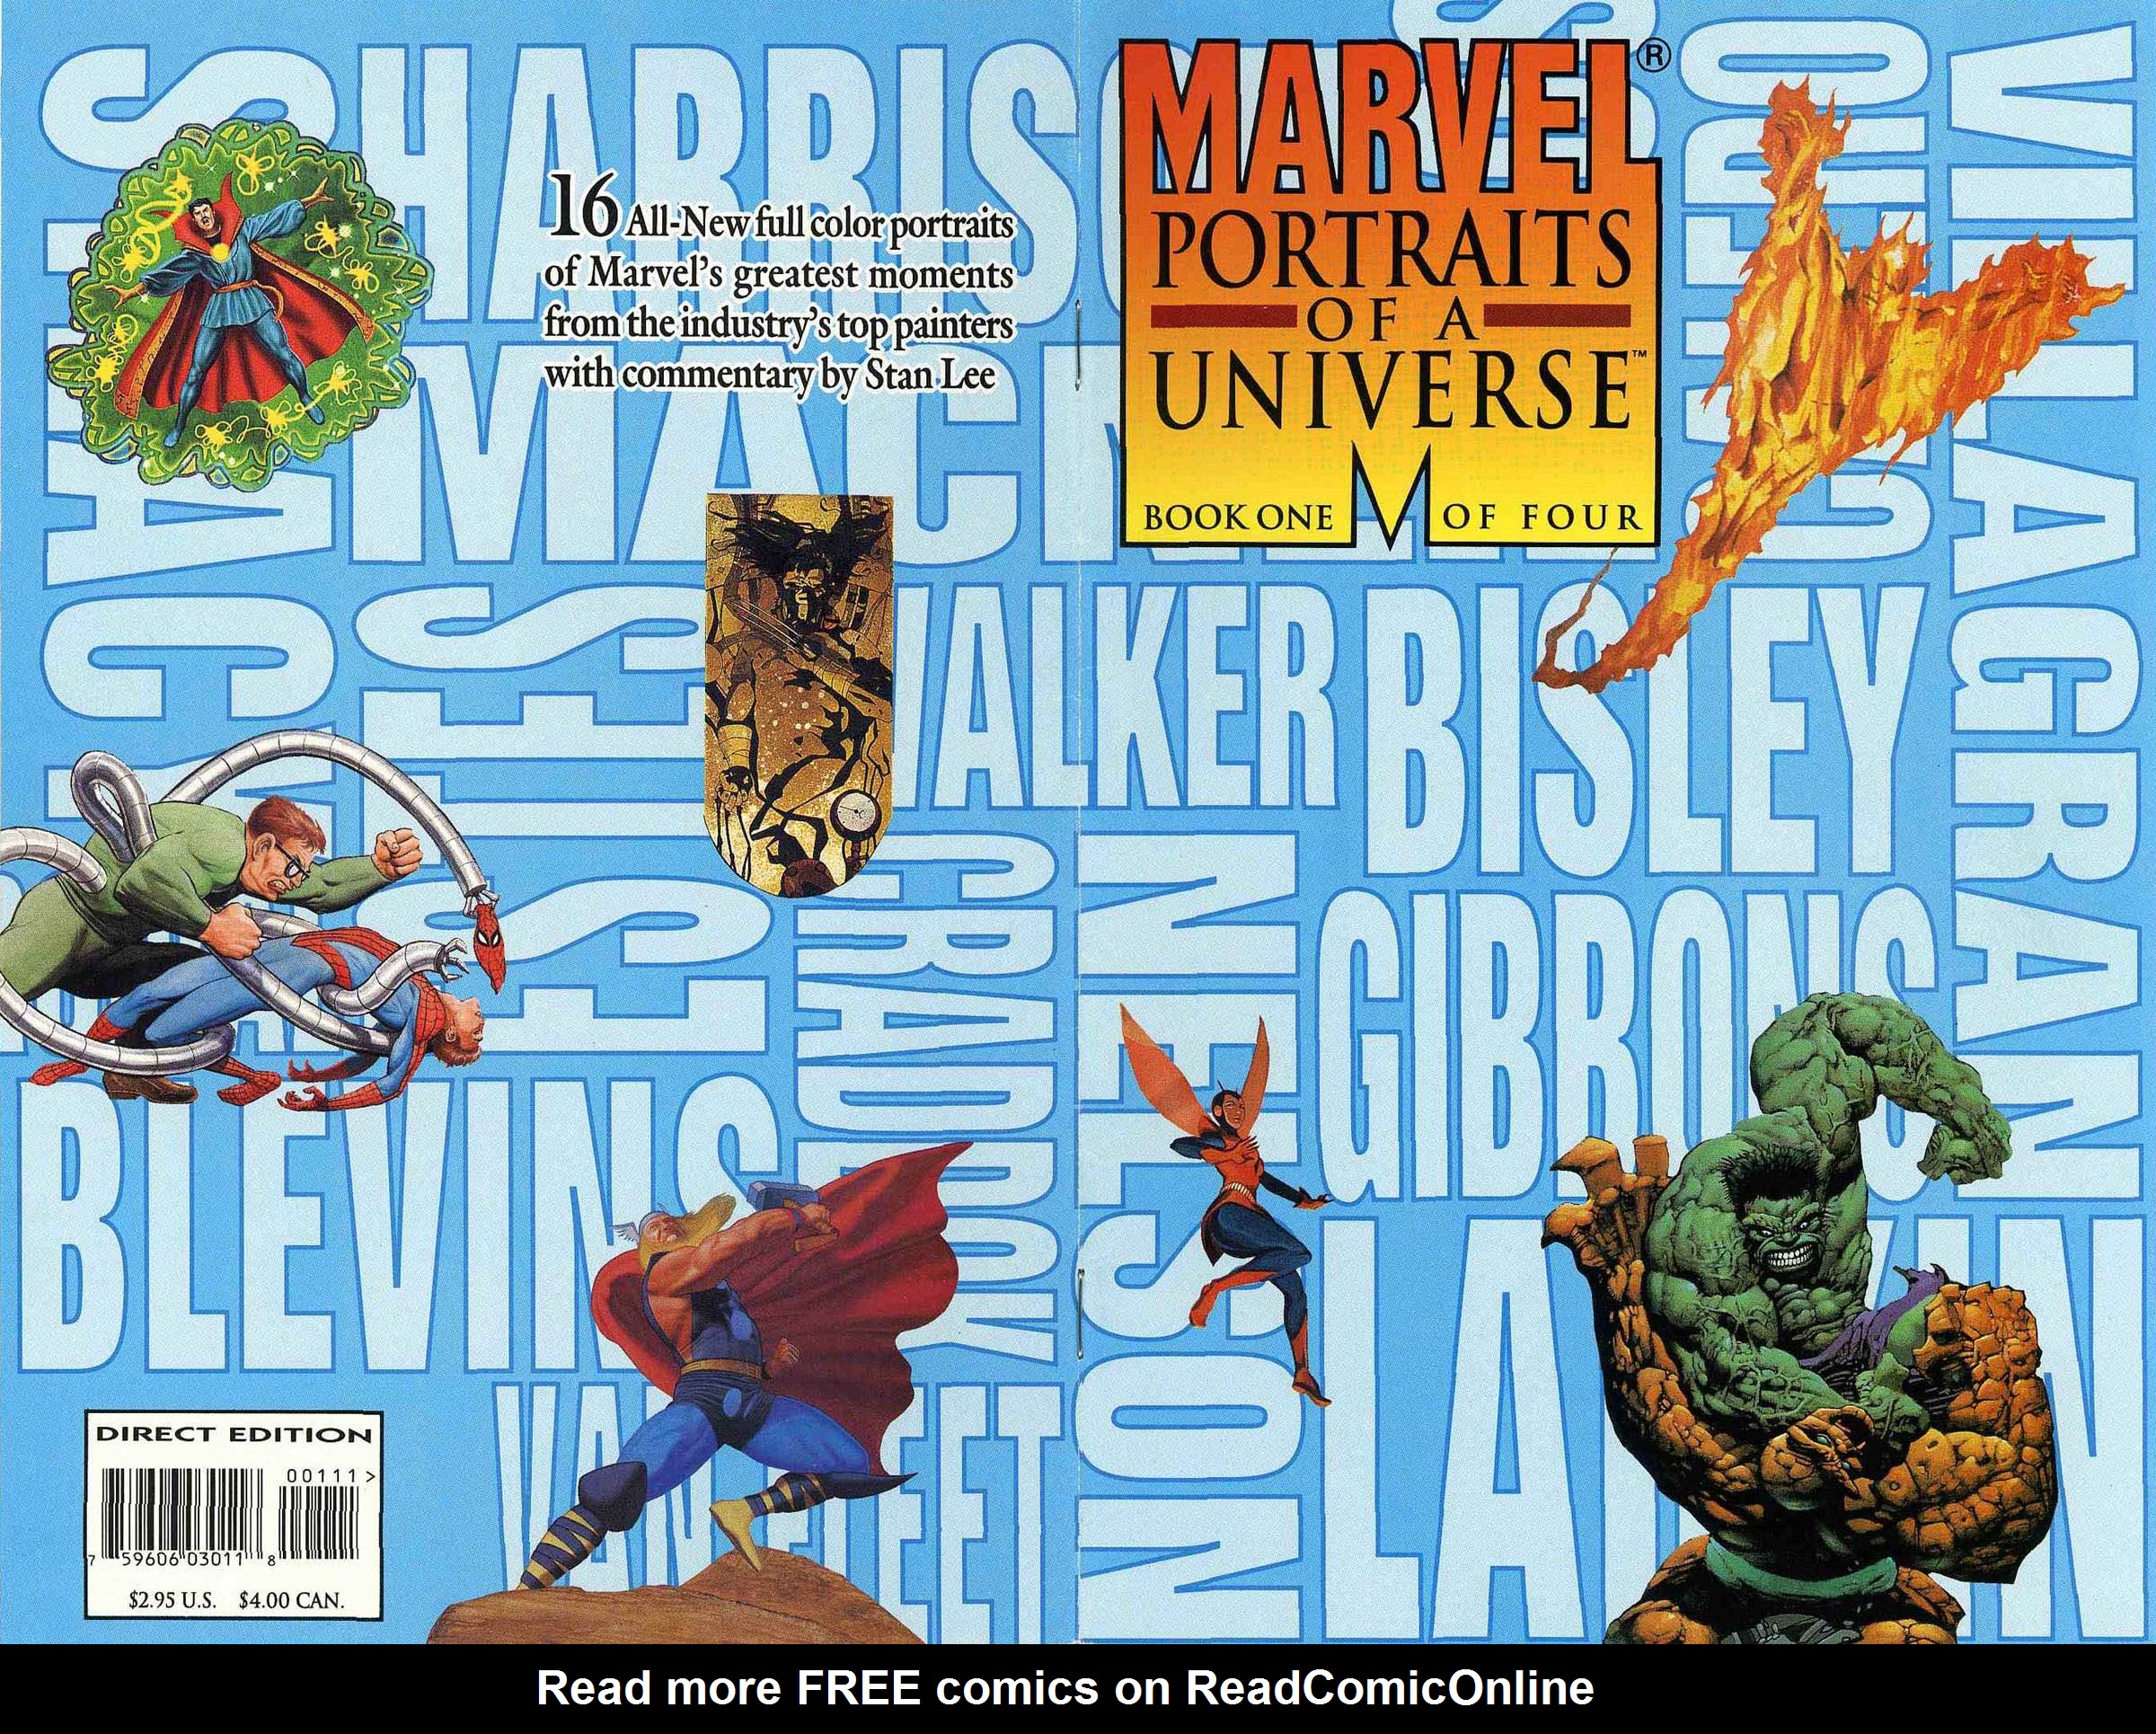 Read online Marvels: Portraits comic -  Issue #1 - 1